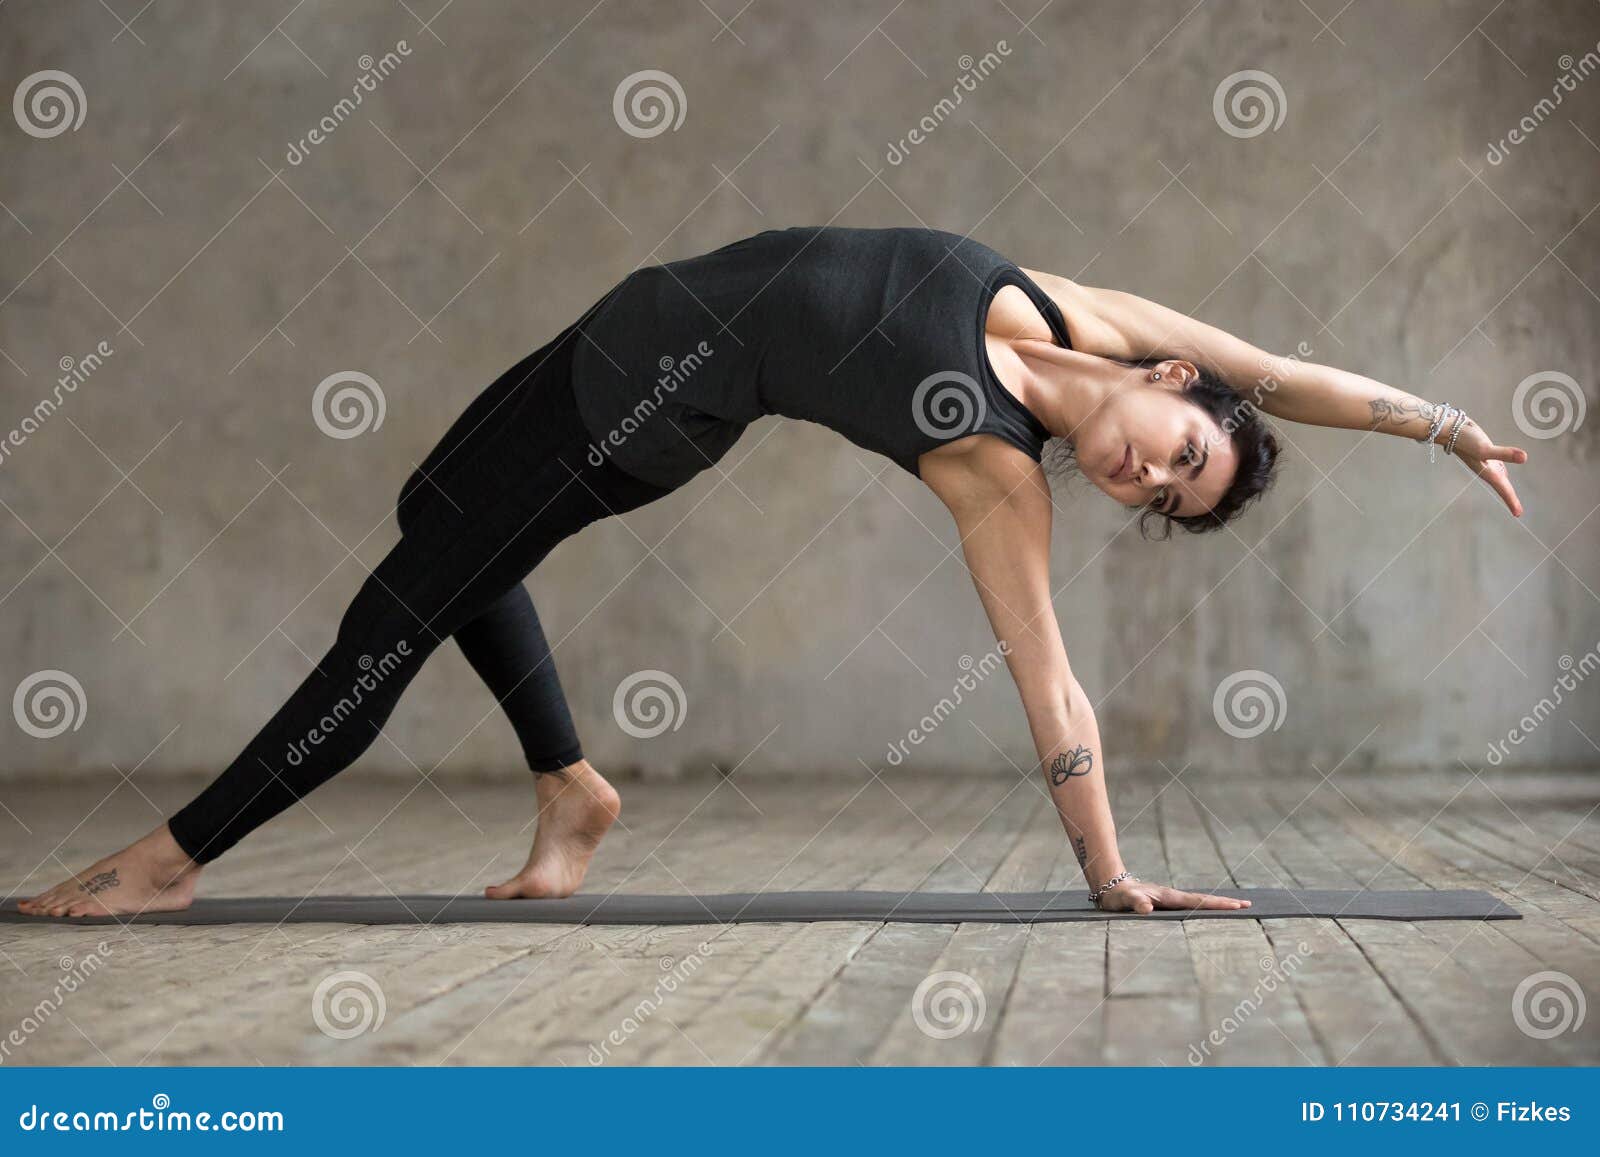 Young Woman in Wild Thing Pose Stock Image - Image of people